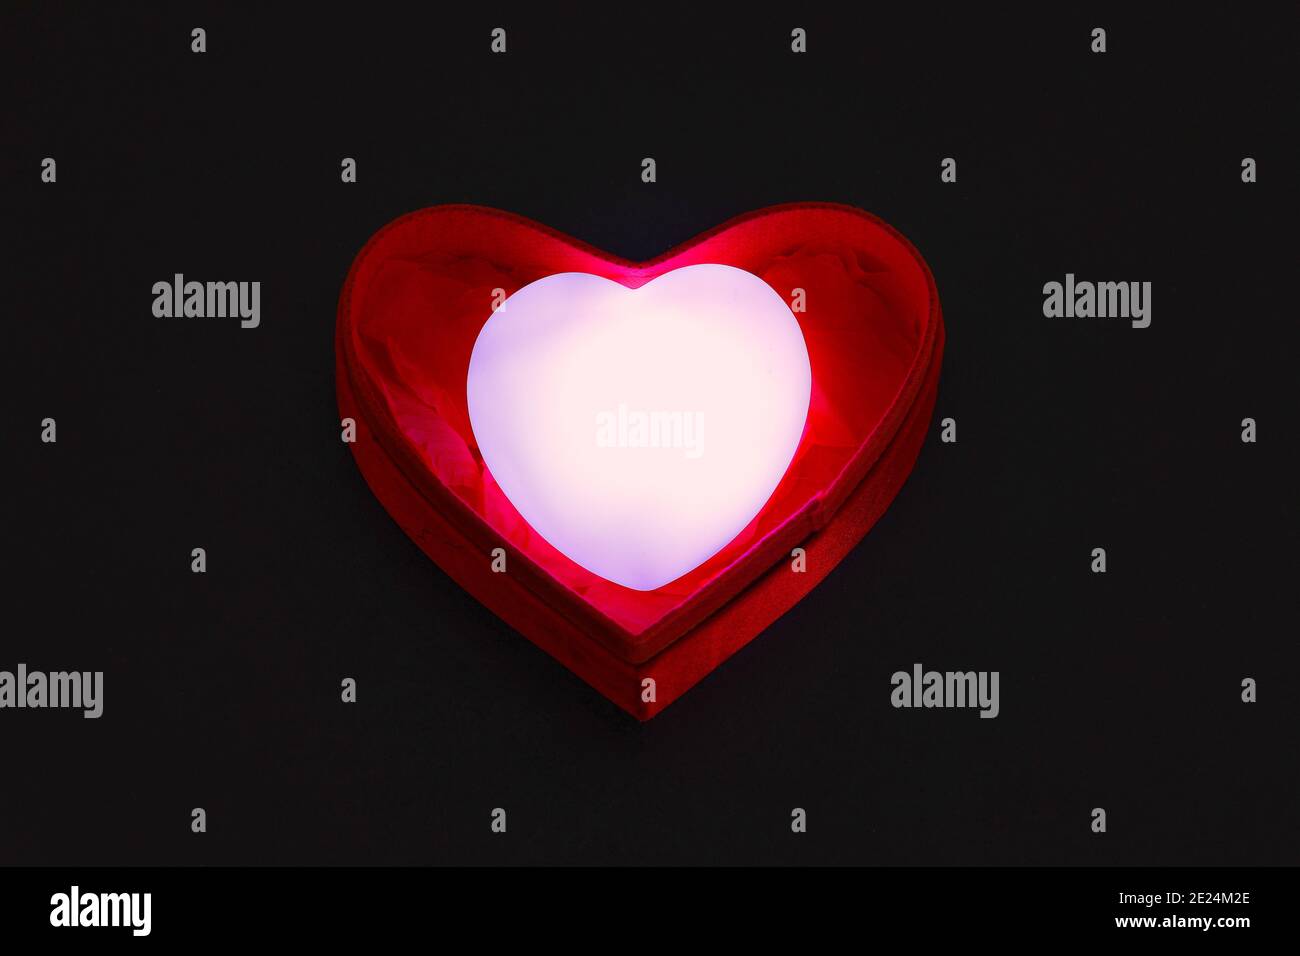 Selective focus of Beautiful valentines day background.  Heart-shaped red gift box with a glowing heart inside on Black Background, top view. Stock Photo